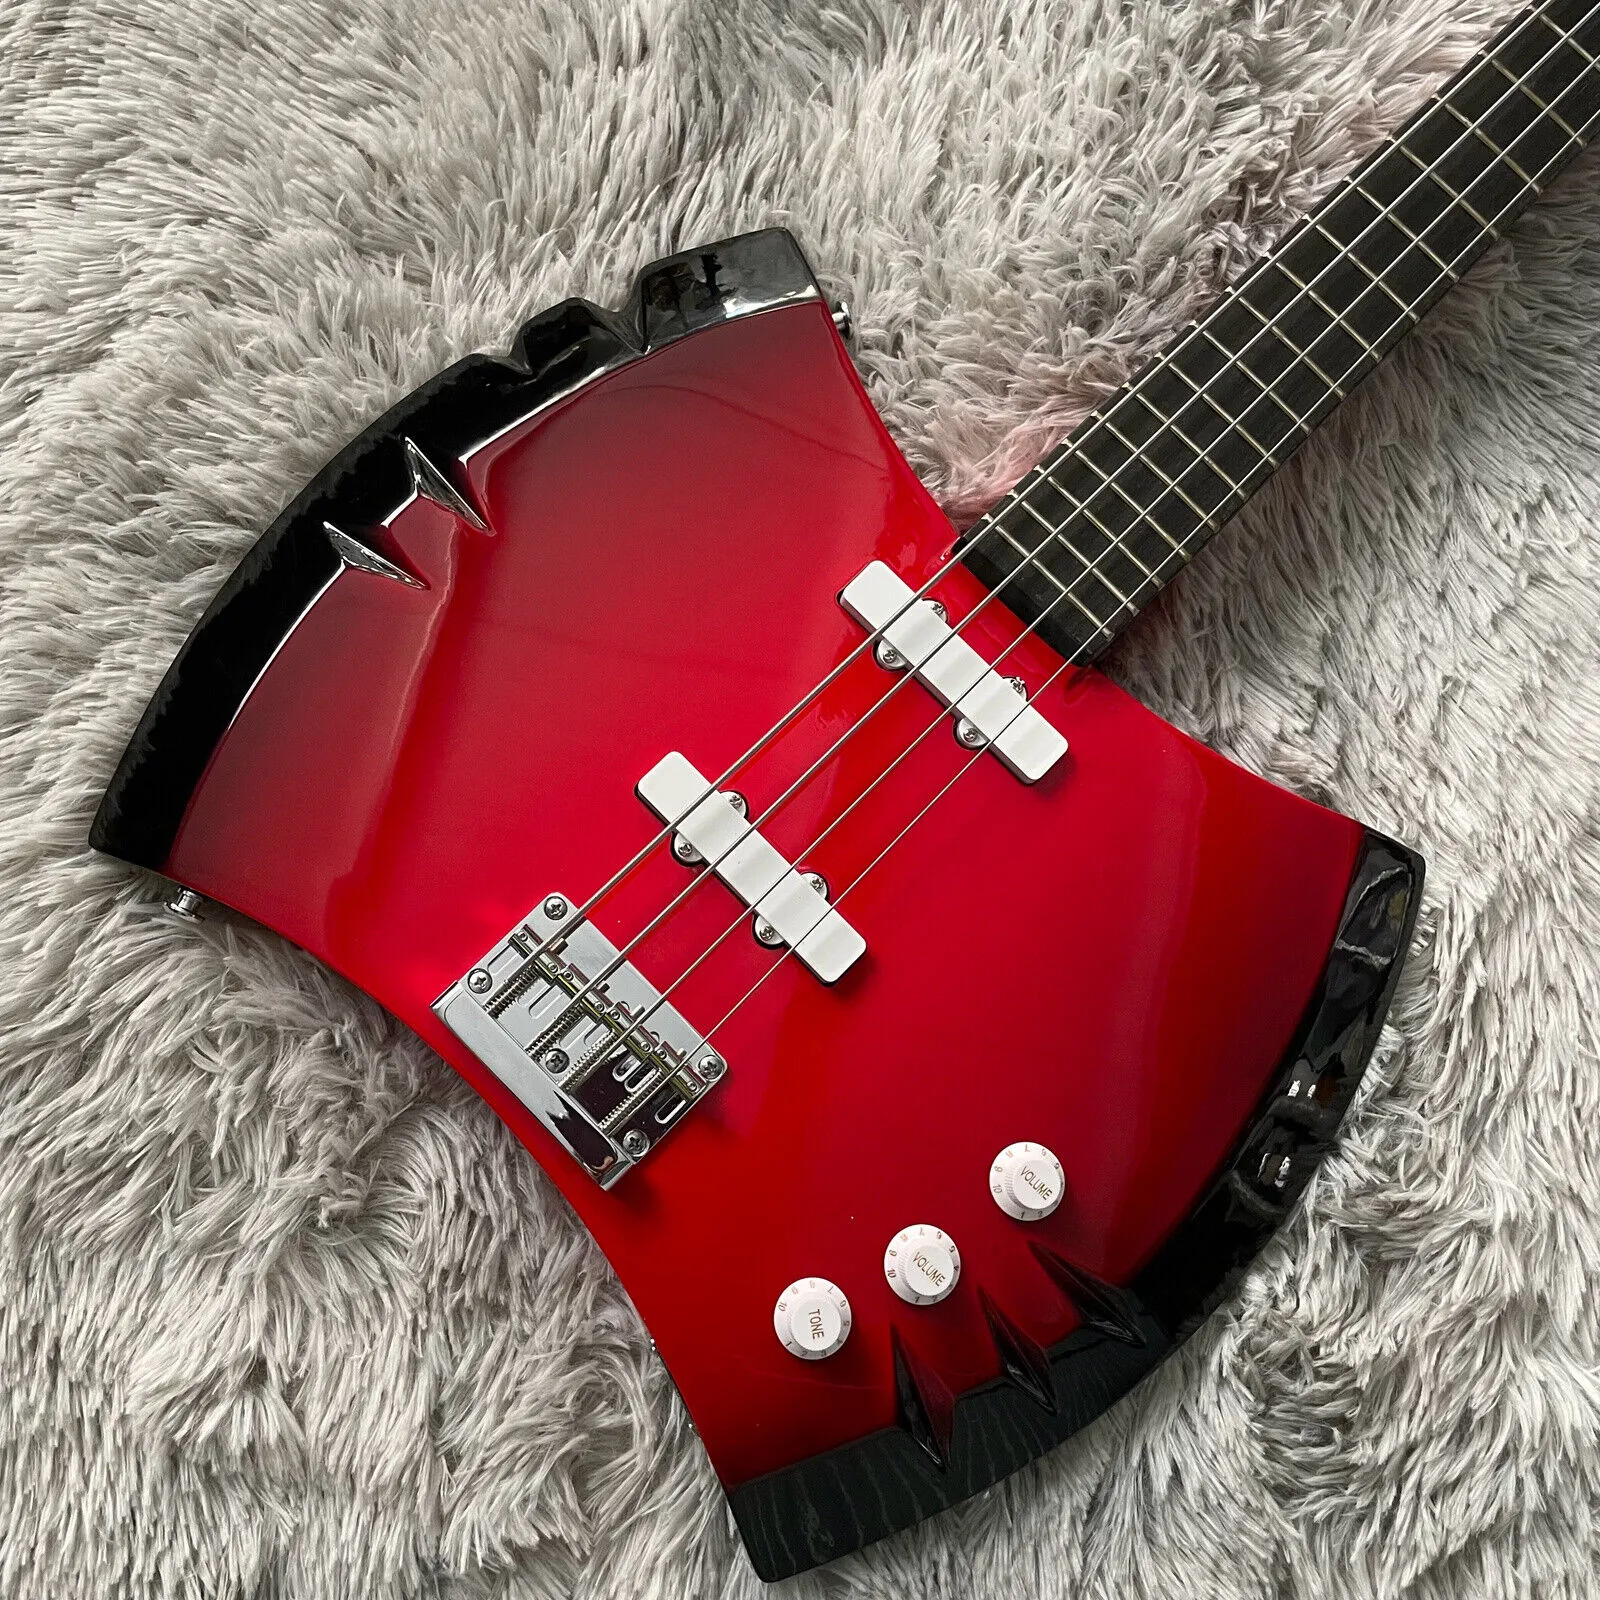 Custom Precision 4 Strings Marcelin Red Panel Axe Bass Electric Guitar Neck Through Body, Chrome Hardware Top Red Black Edge Short Scale